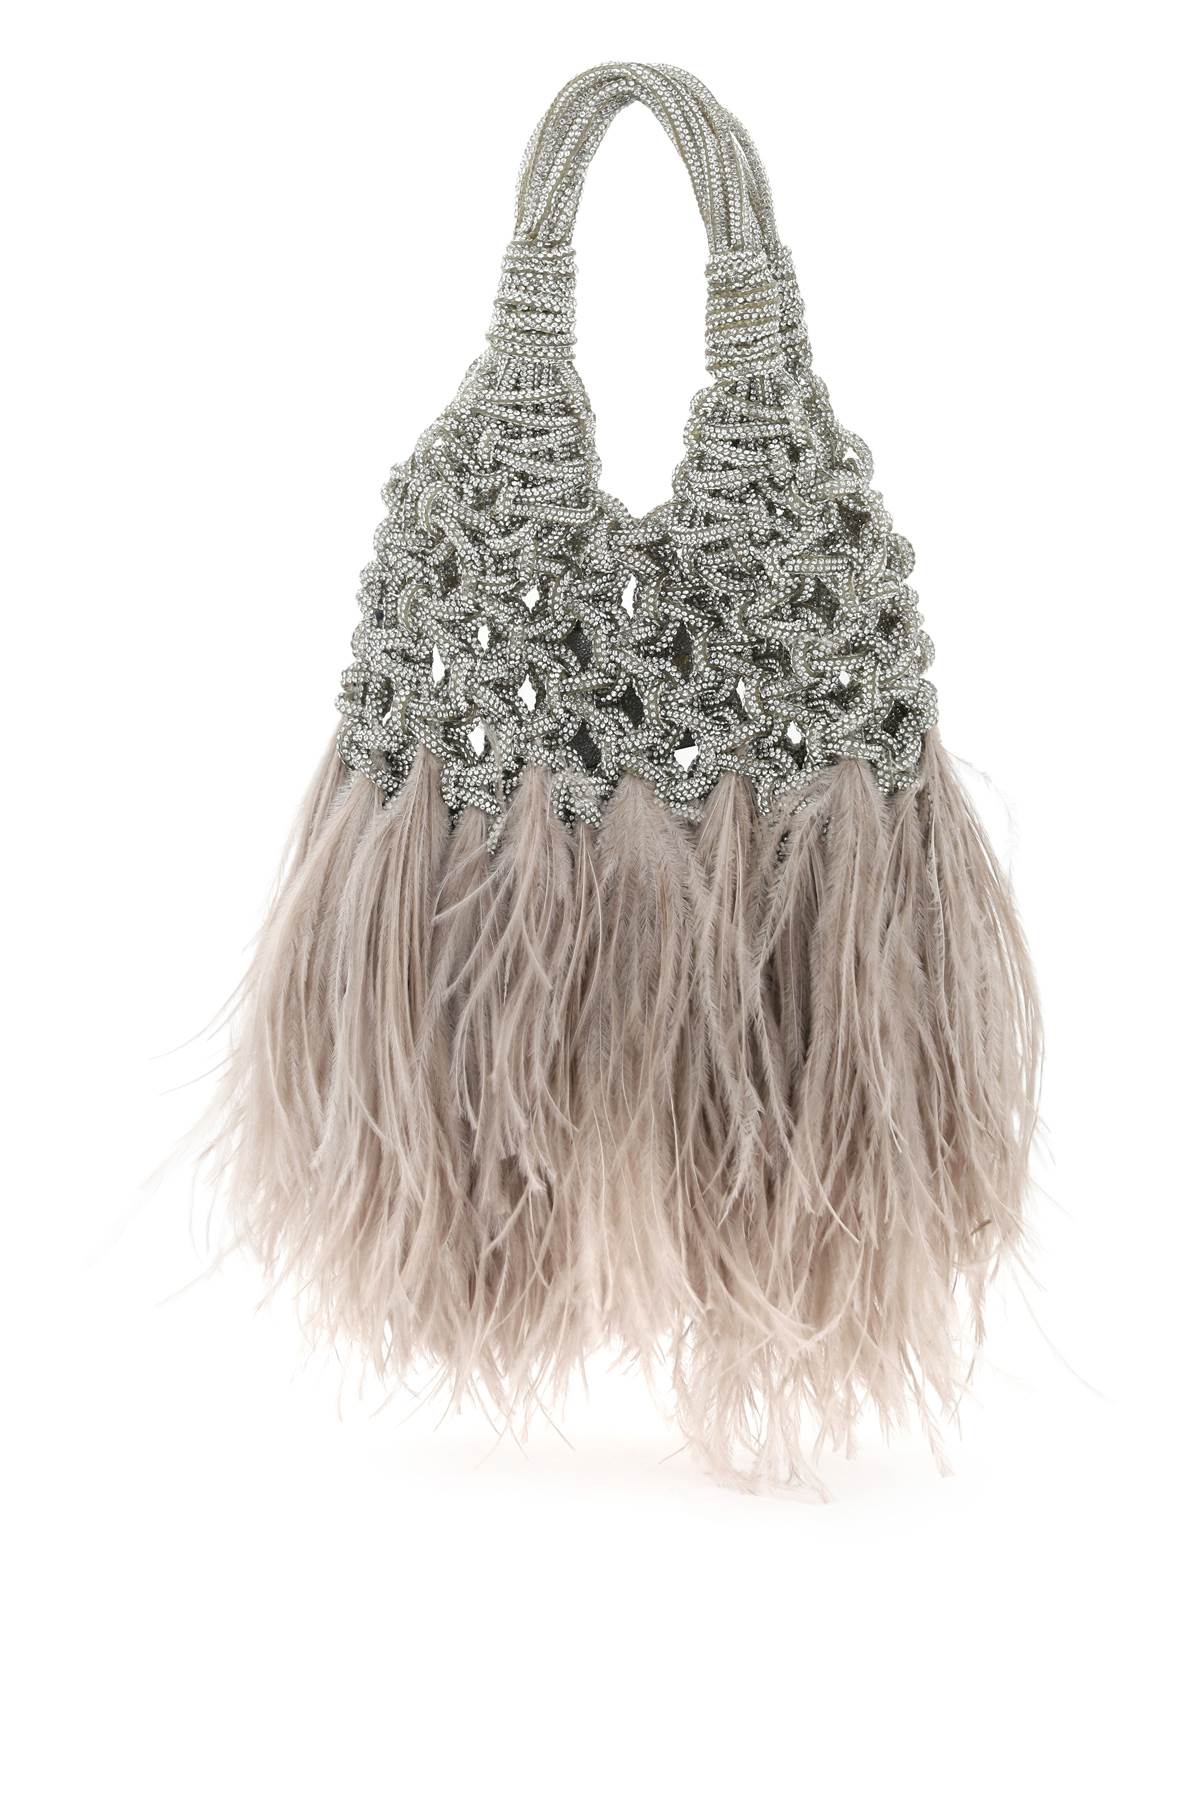 HIBOURAMA Silver Mini Vannifique Hand-Woven Clutch with Ostrich Feathers and Micro Crystals